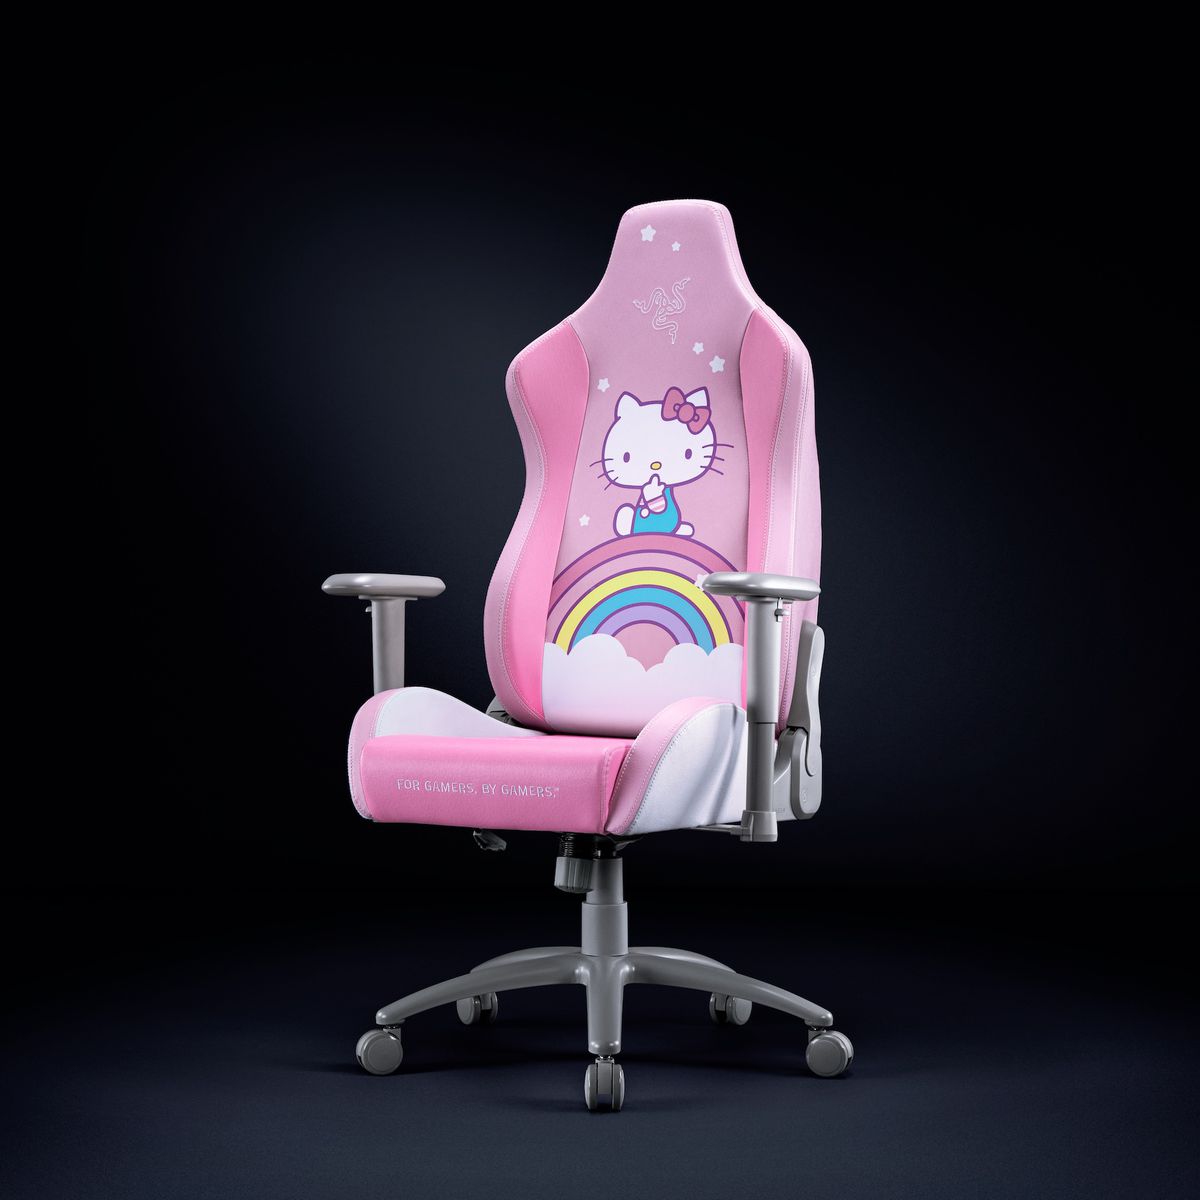 Front product shot of the Hello Kitty Razer Iskur X gaming chair